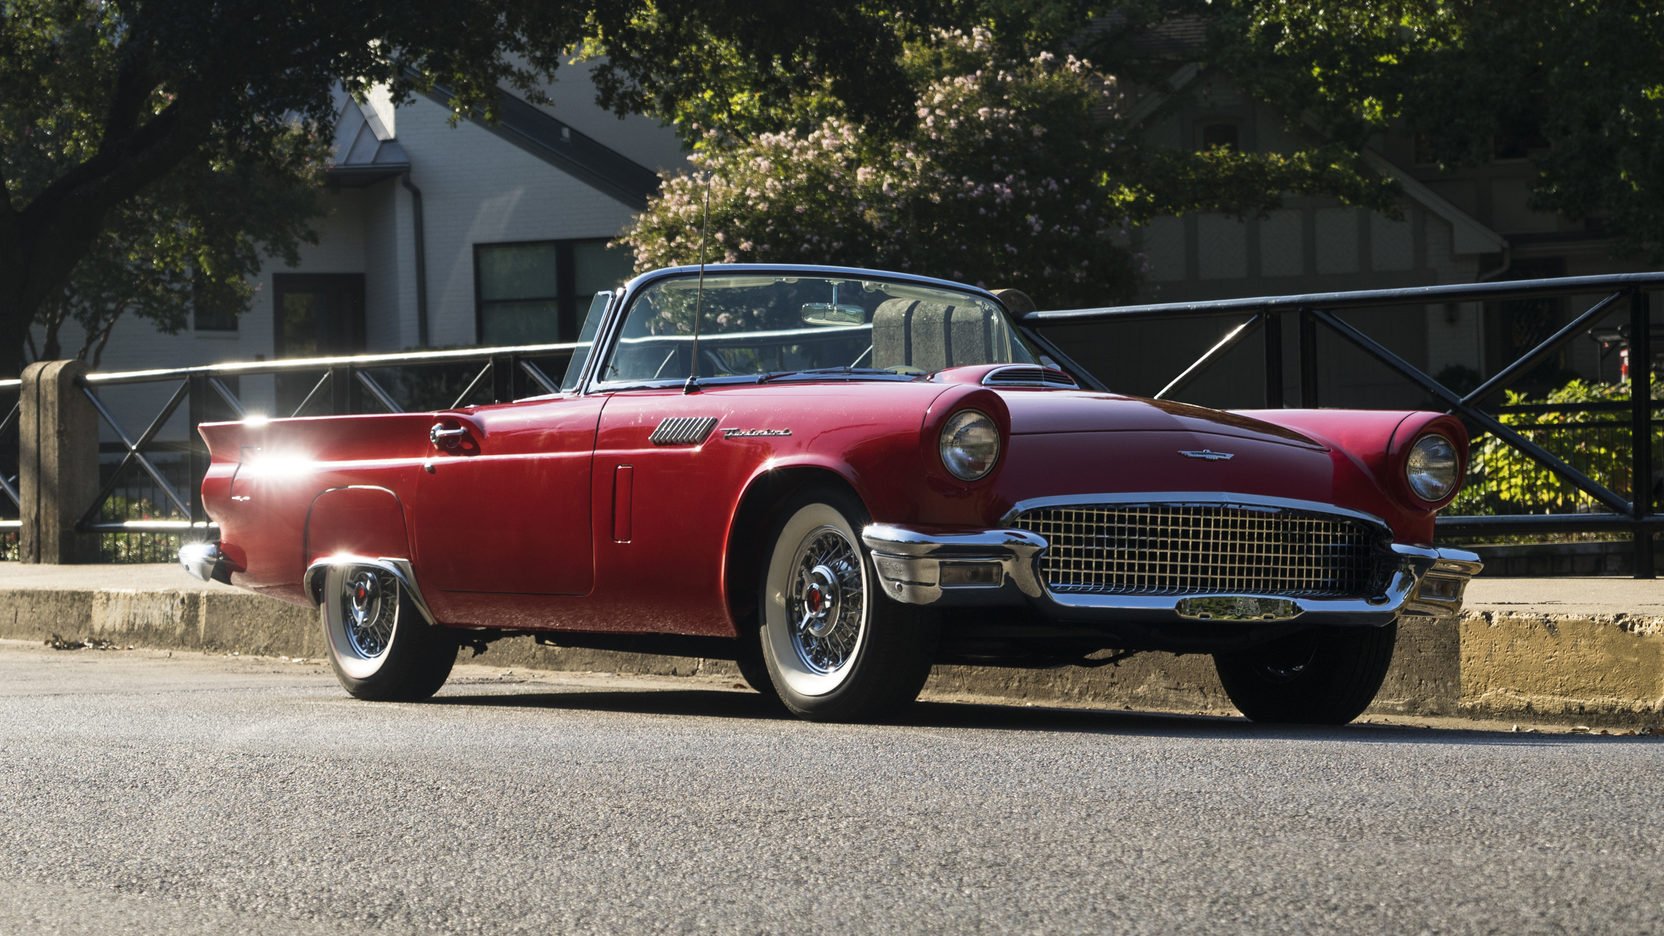 1957, Cars, Classic, Ford, Thunderbird, Red, E code Wallpaper